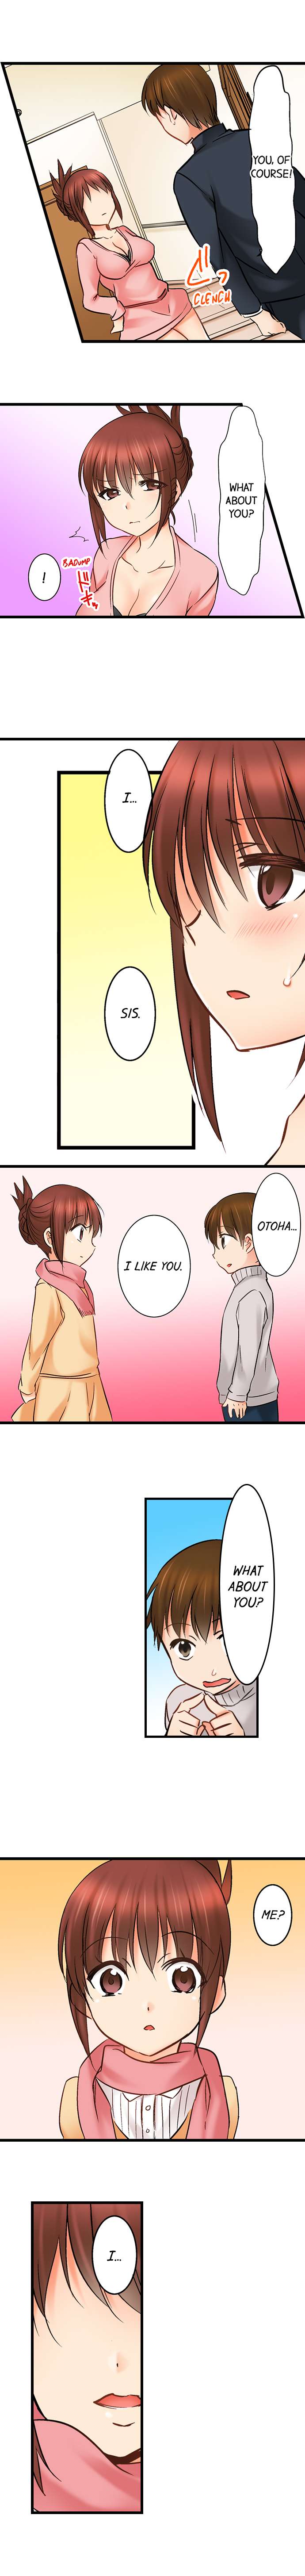 Touching My Older Sister Under the Table - Chapter 21 Page 7